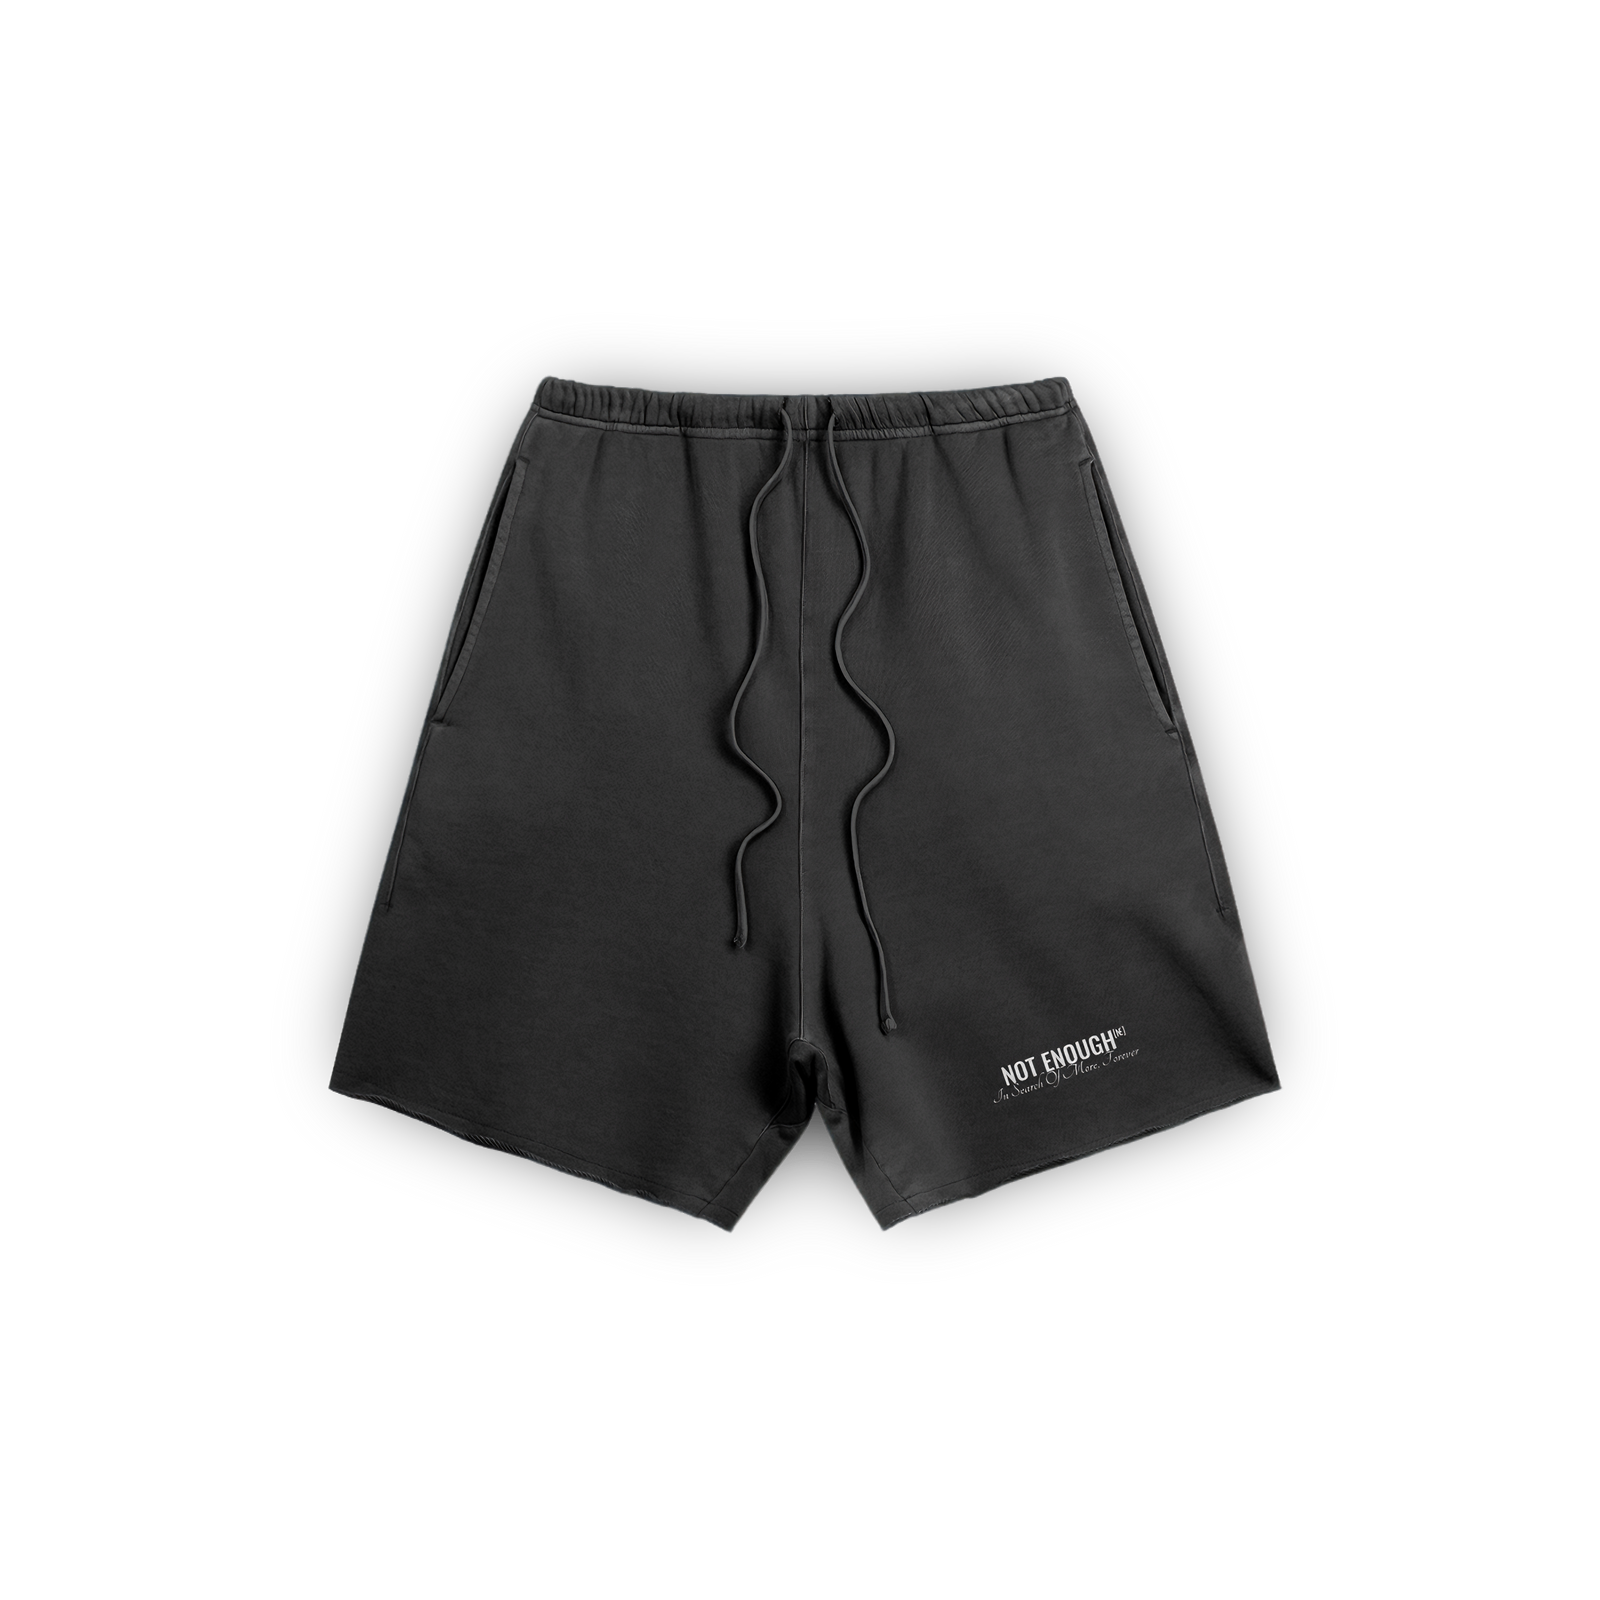 Washed Shorts "For Seekers"